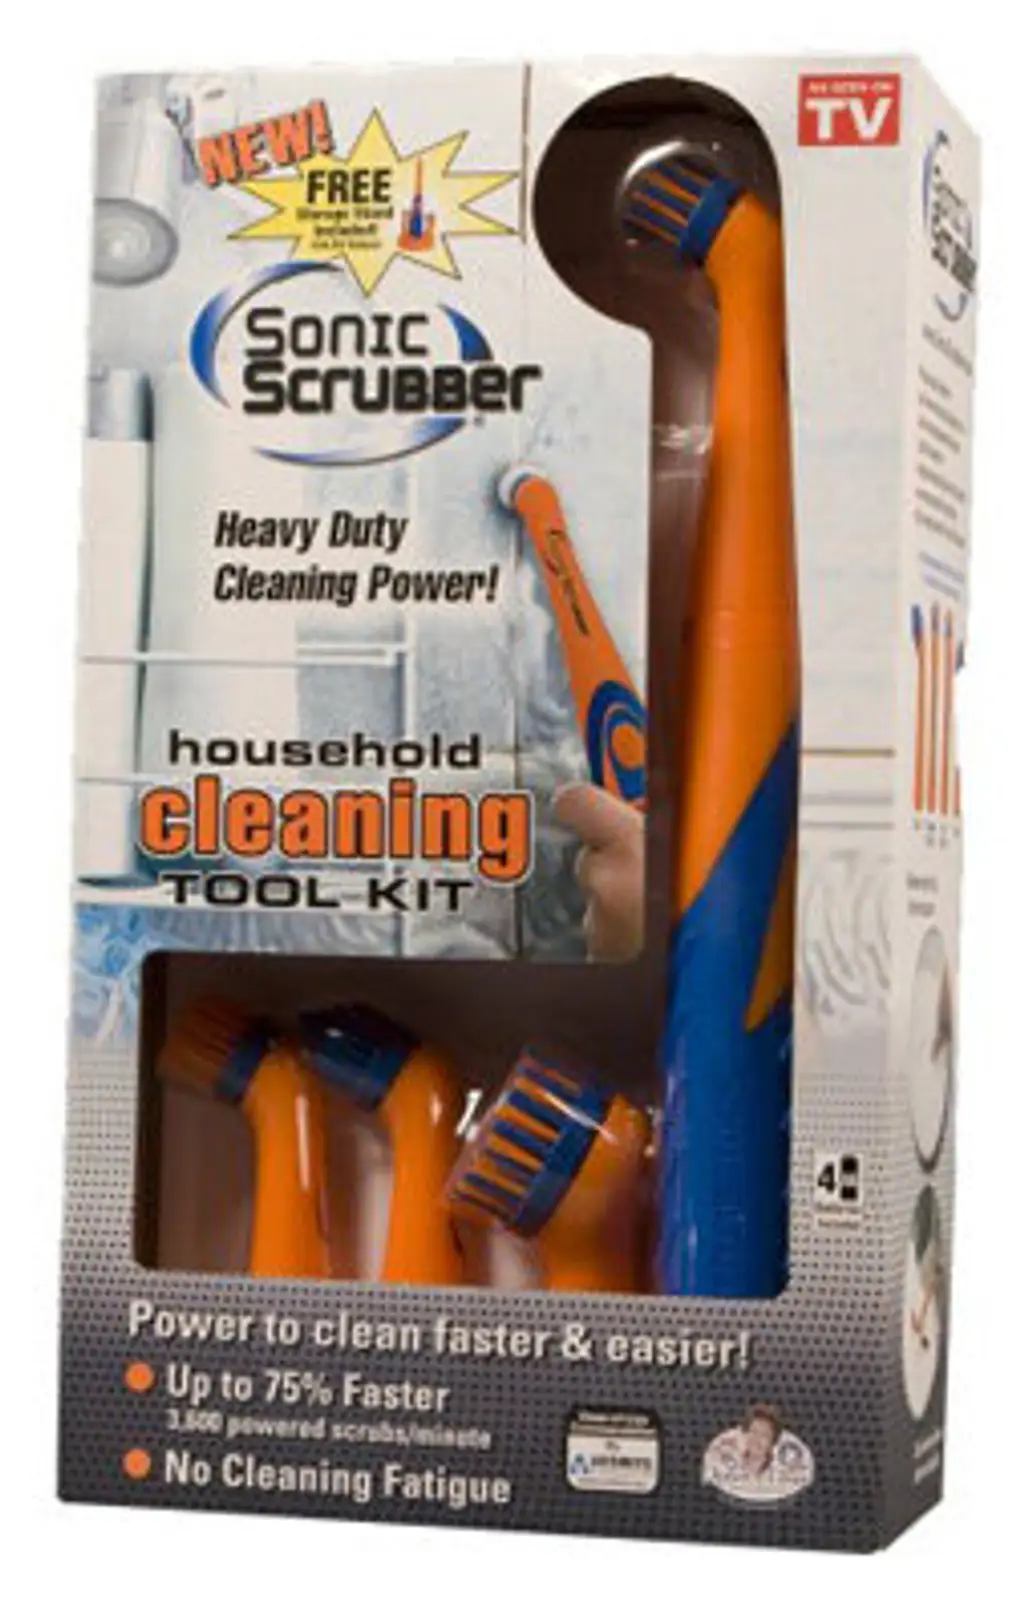 SonicScrubber Household and Kitchen Powered Cleaning Kit